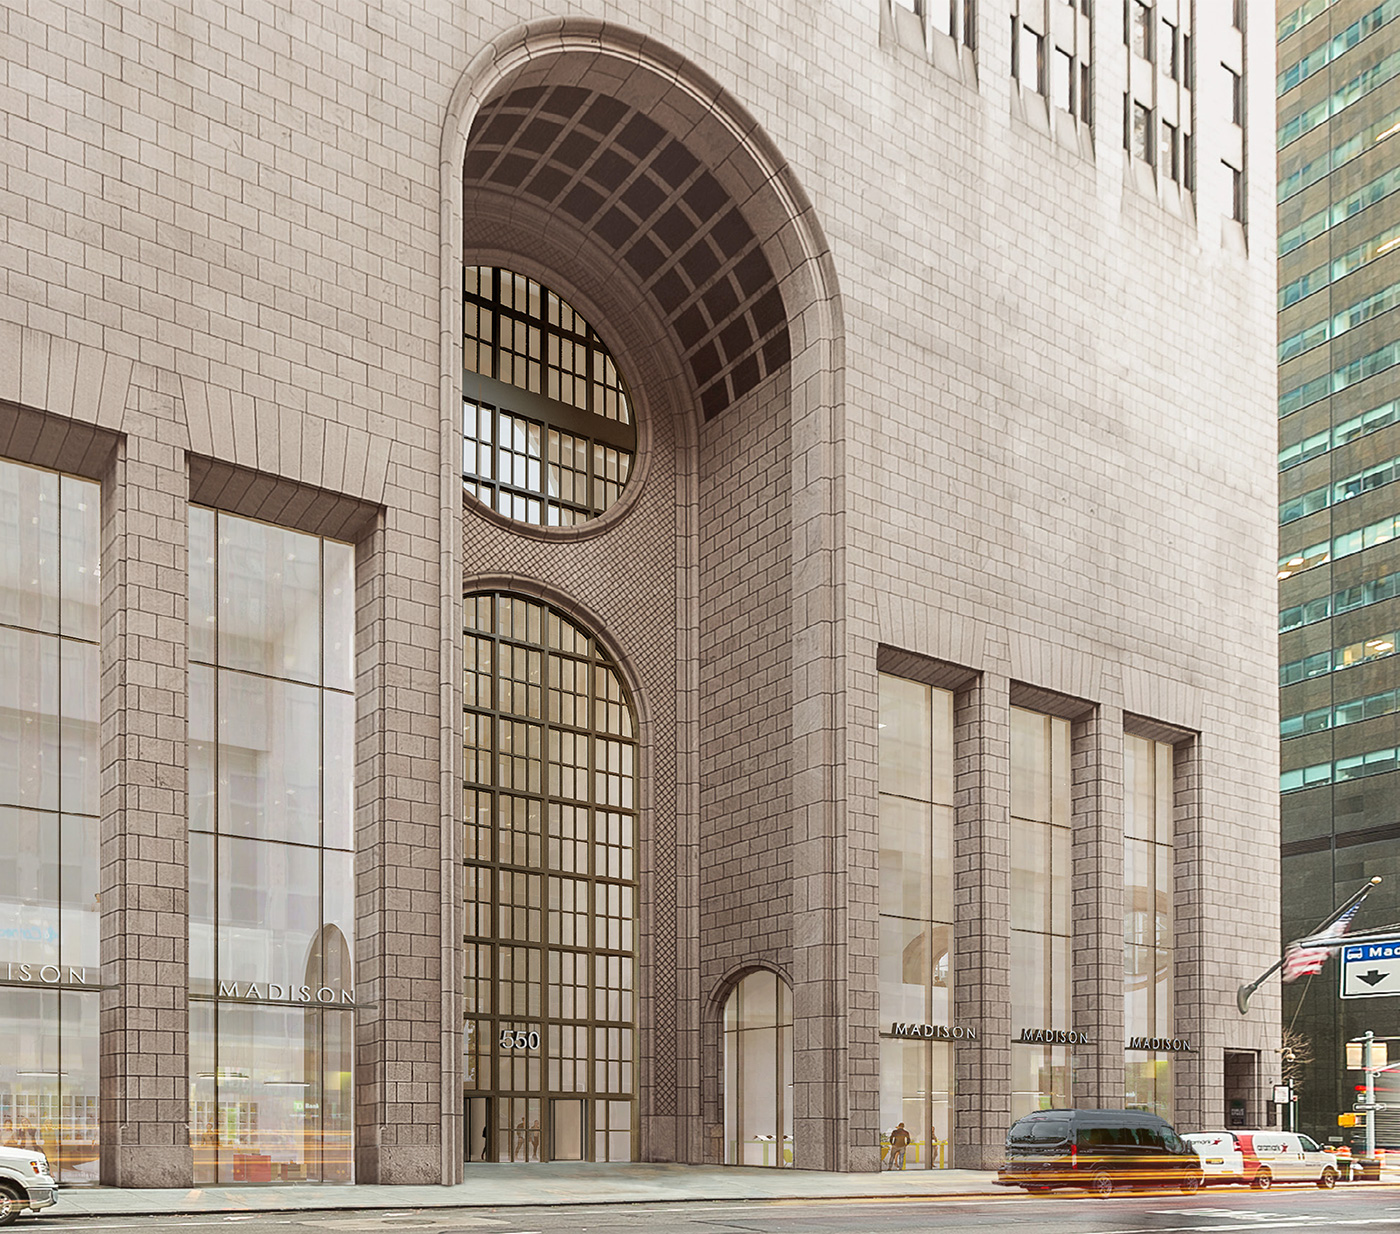 Rendering of 550 Madison redesign